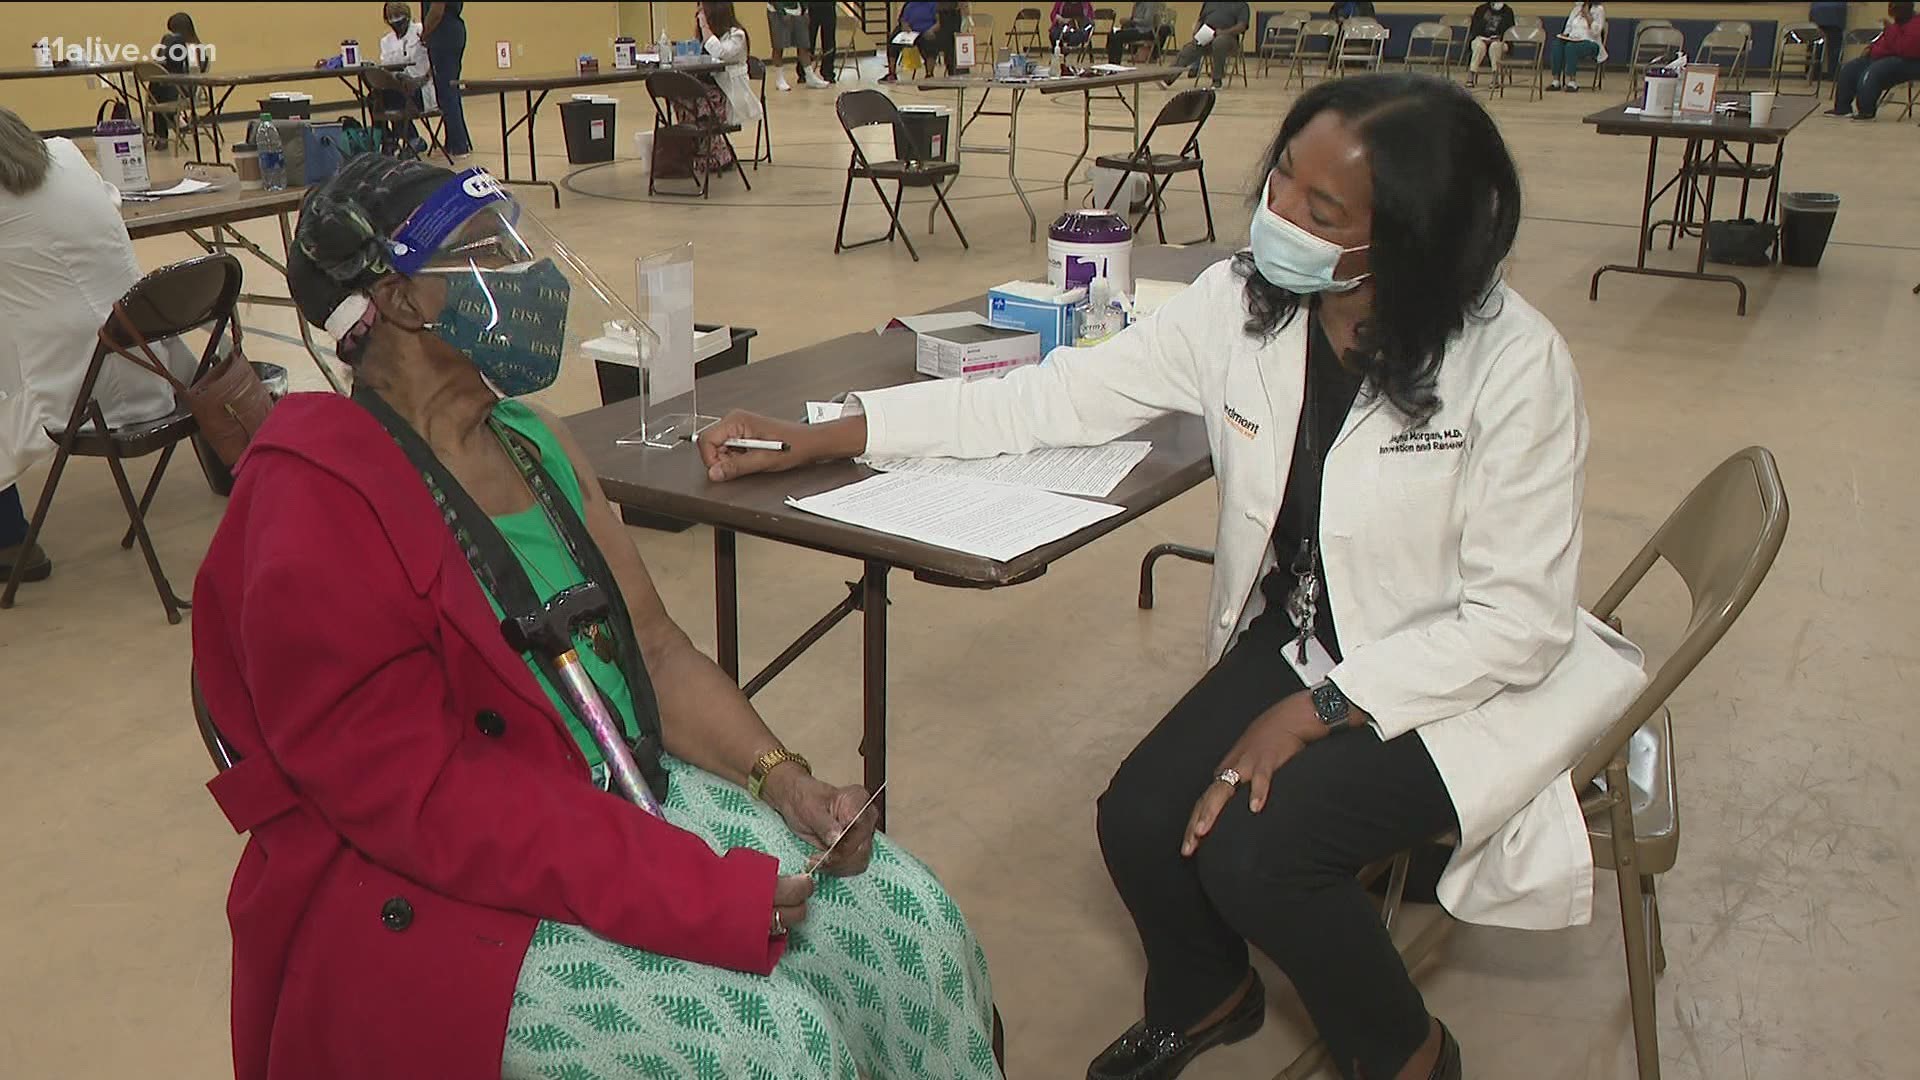 The effort underway to help get the vaccine to people who lack access in south Atlanta reunited a pair long after they met.